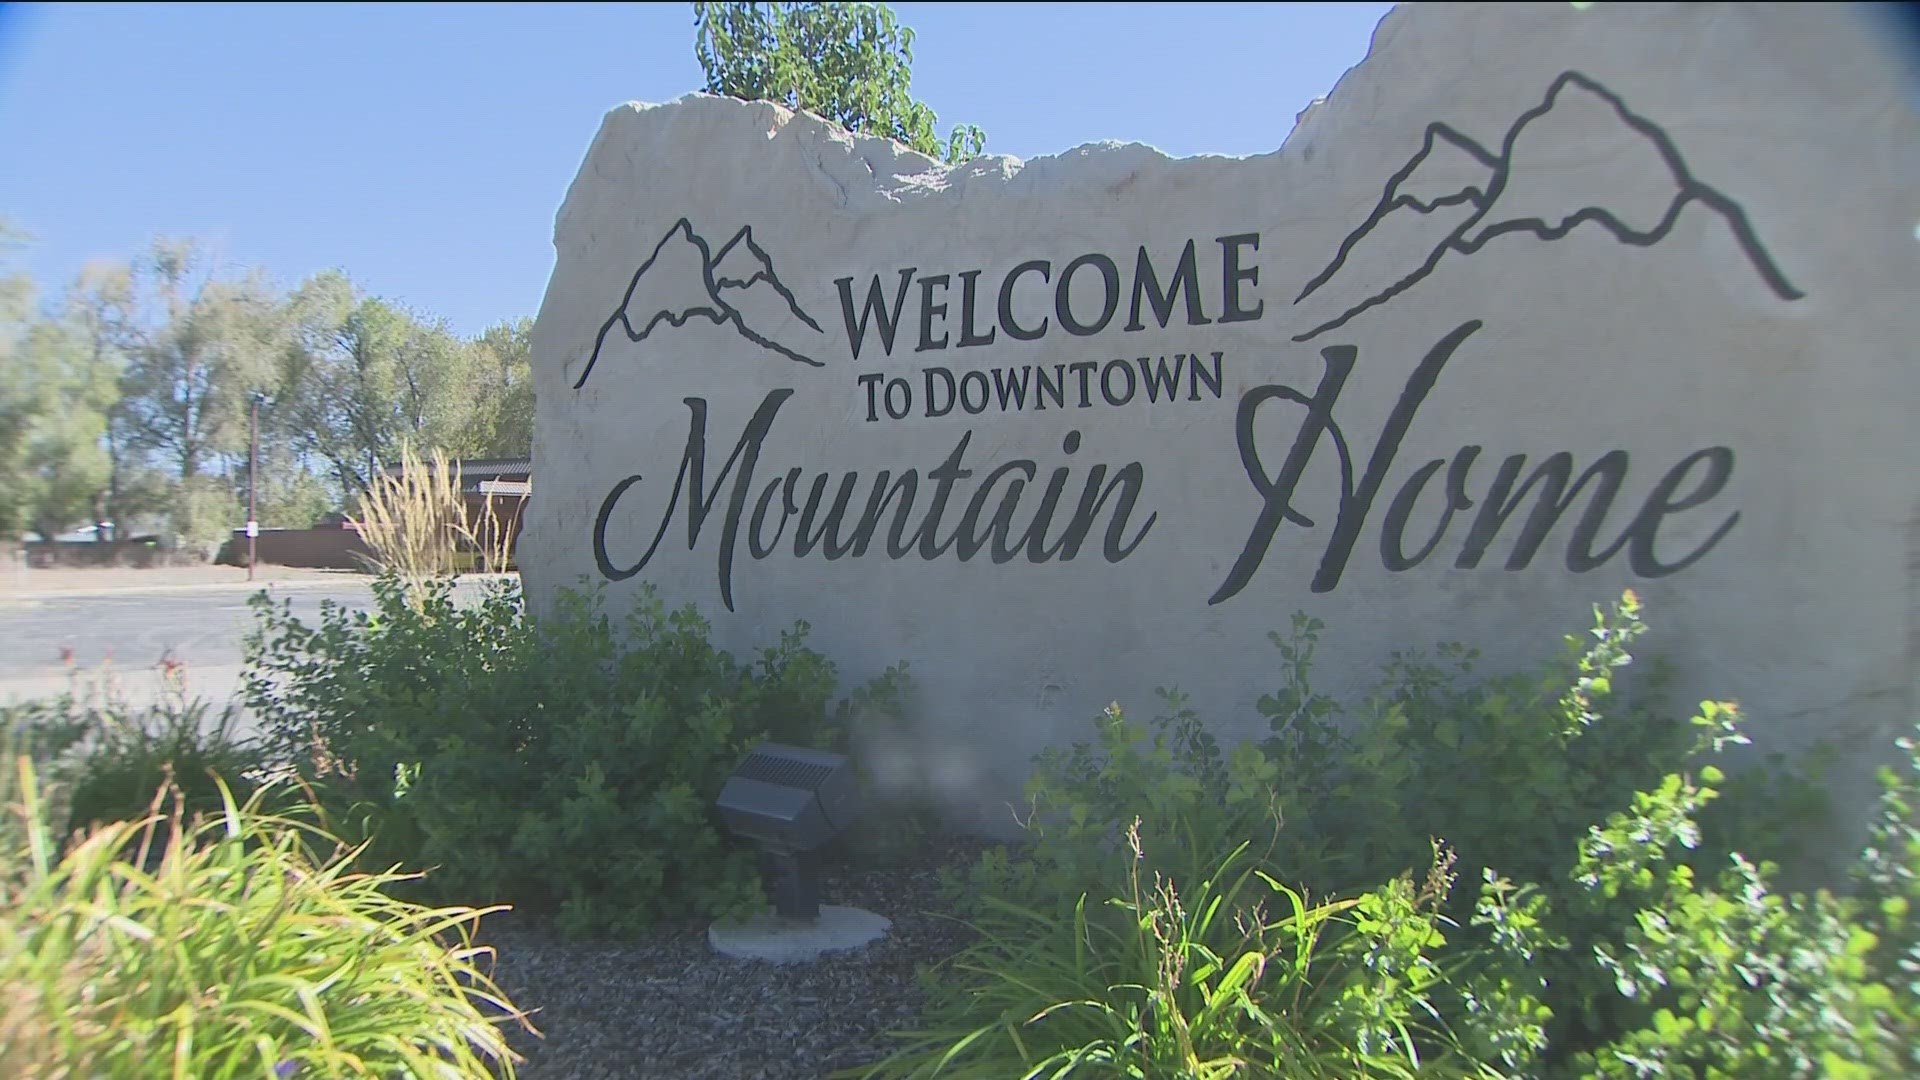 An update on where Mountain Home and the Shoshone-Bannock Tribes stand on building a casino in the area.